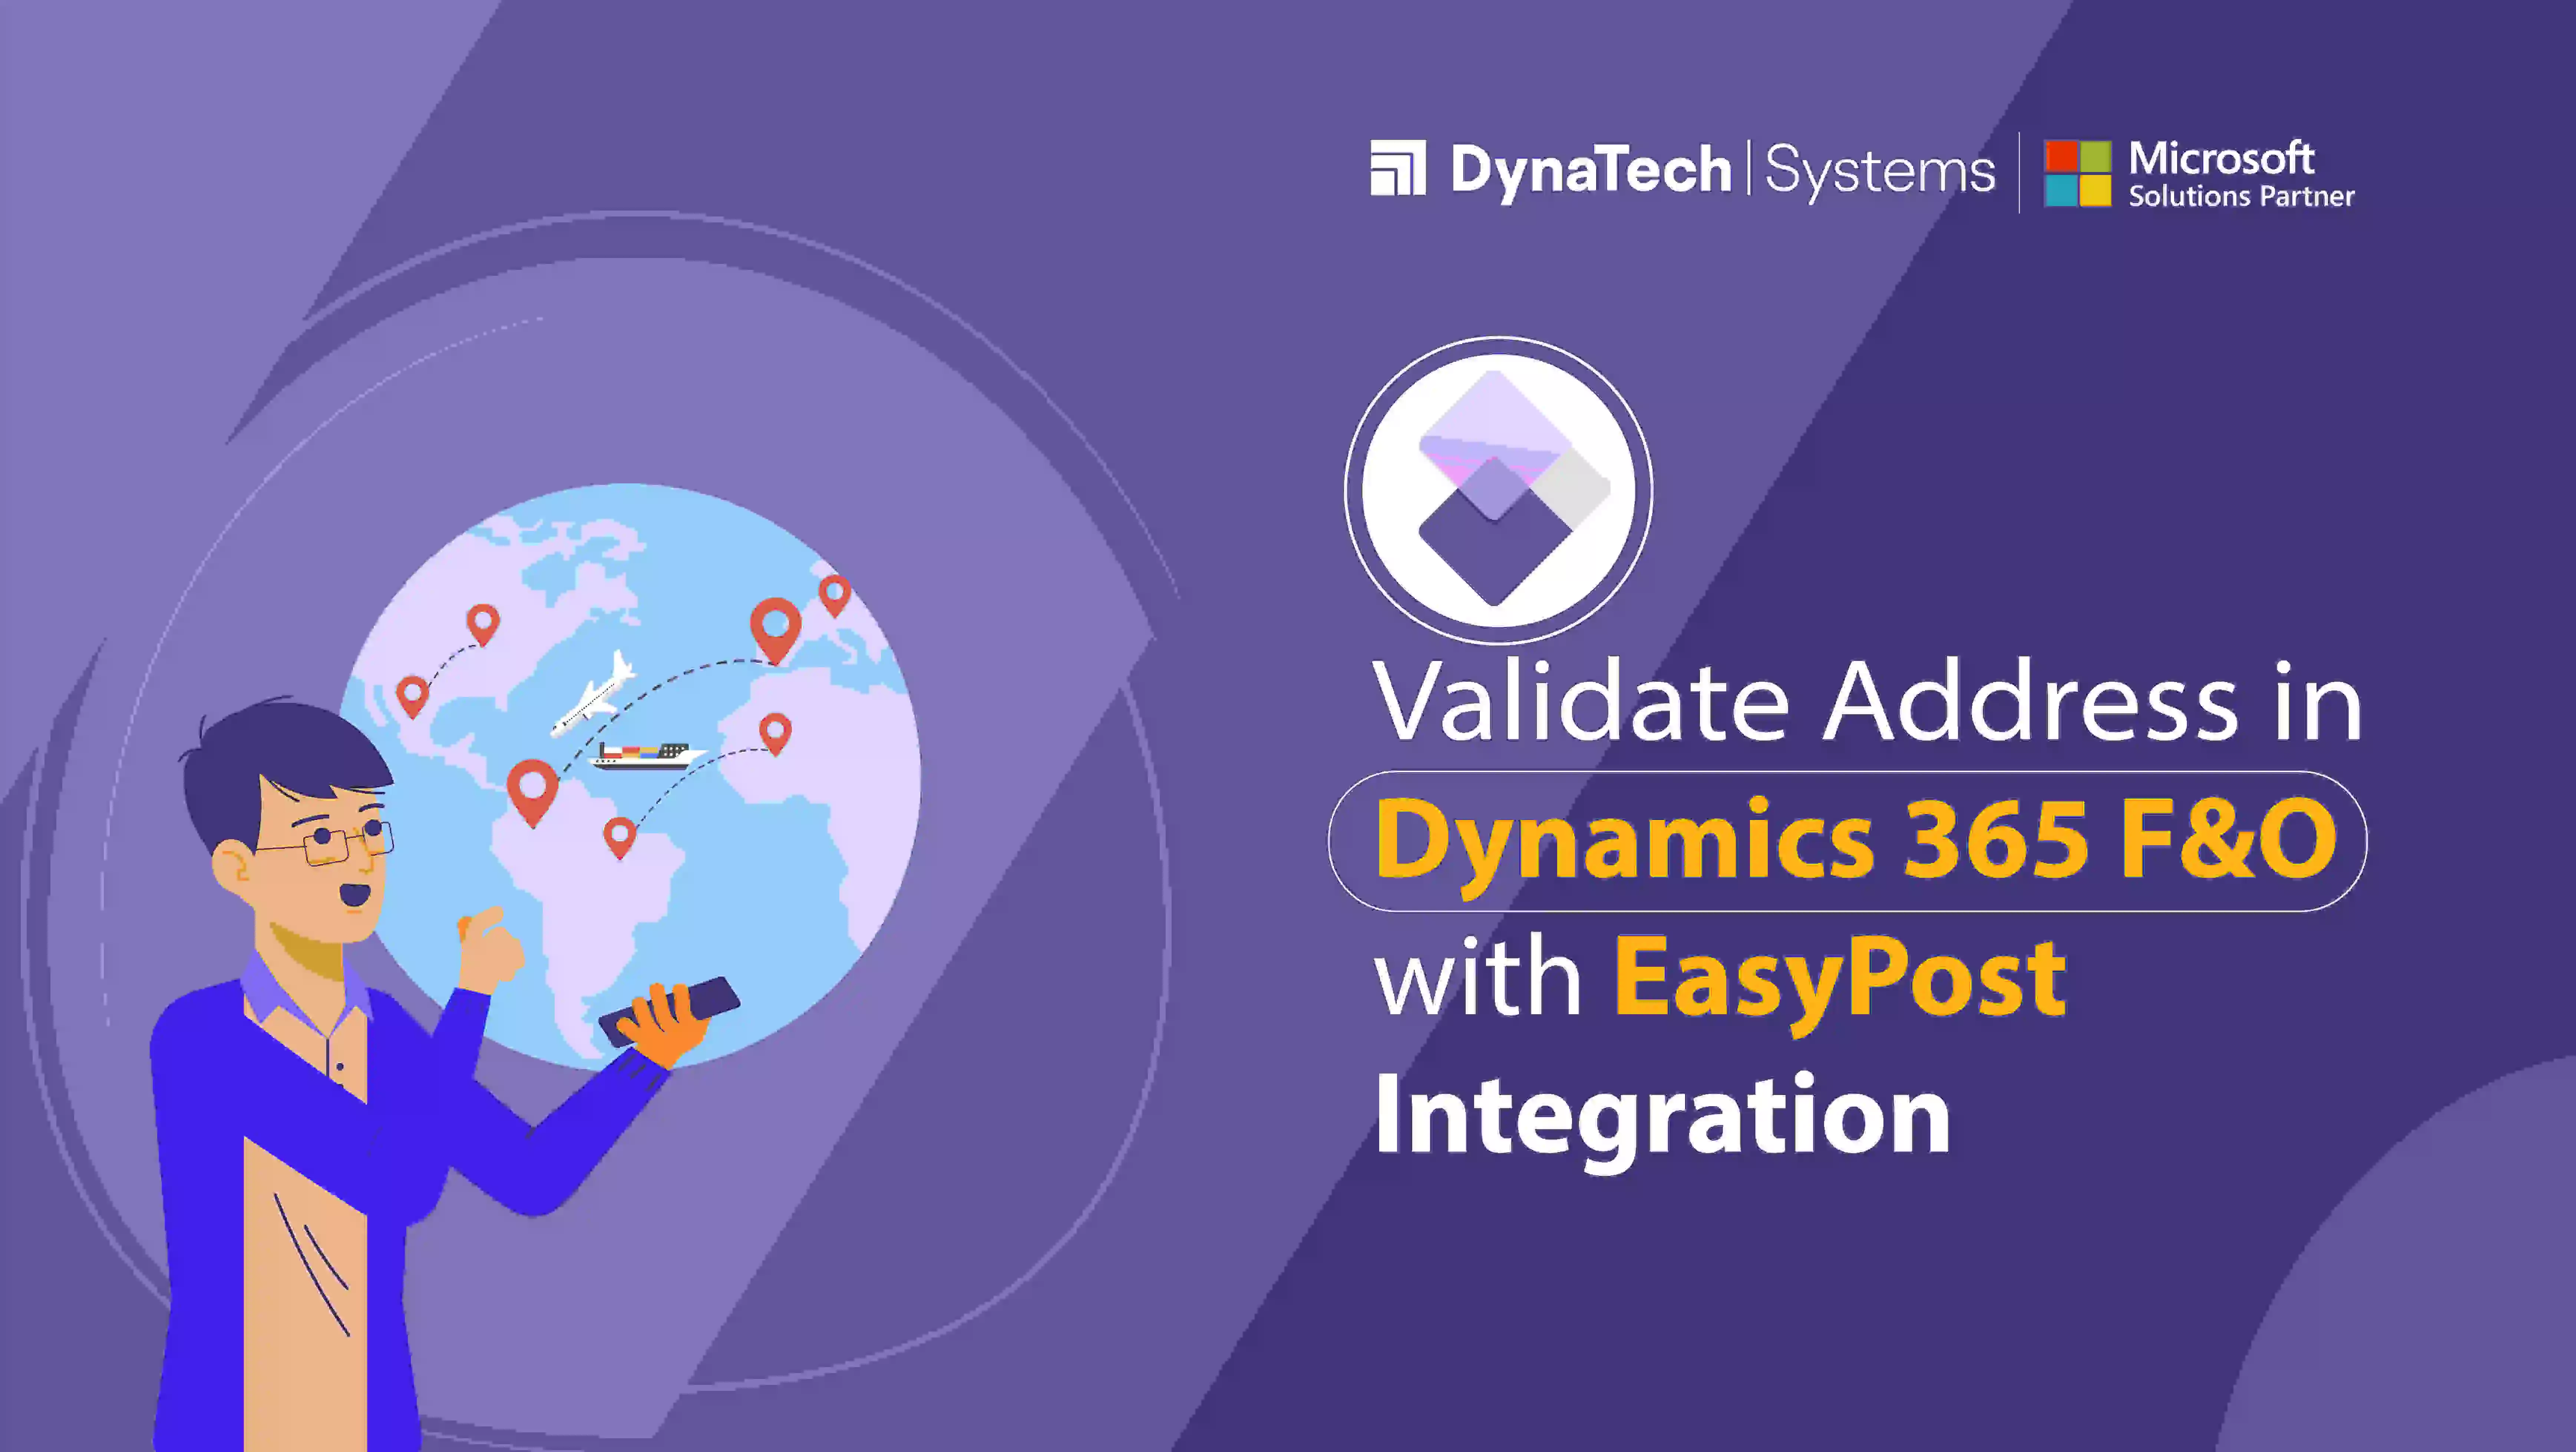 Validate Address in Dynamics 365 F&O with EasyPost Integration